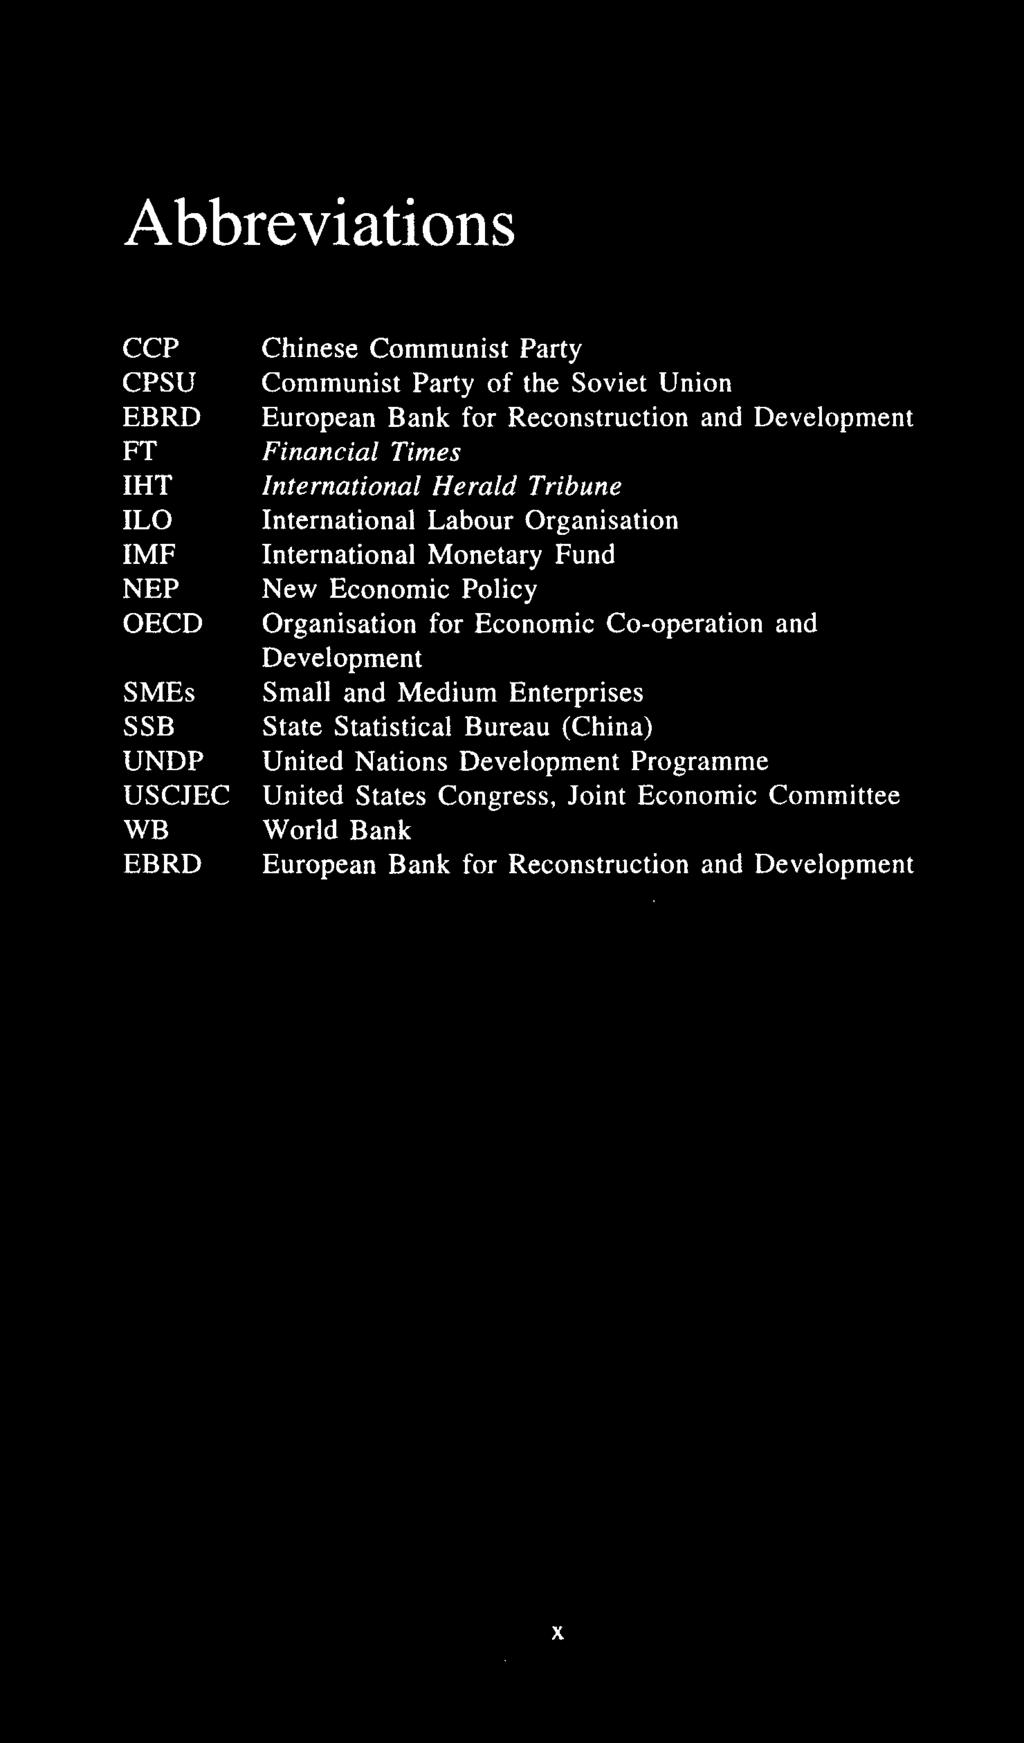 Abbreviations CCP CPSU EBRD FT IHT ILO IMF NEP OECD SMEs SSB UNDP USCJEC WB EBRD Chinese Communist Party Communist Party of the Soviet Union European Bank for Reconstruction and Development Financial